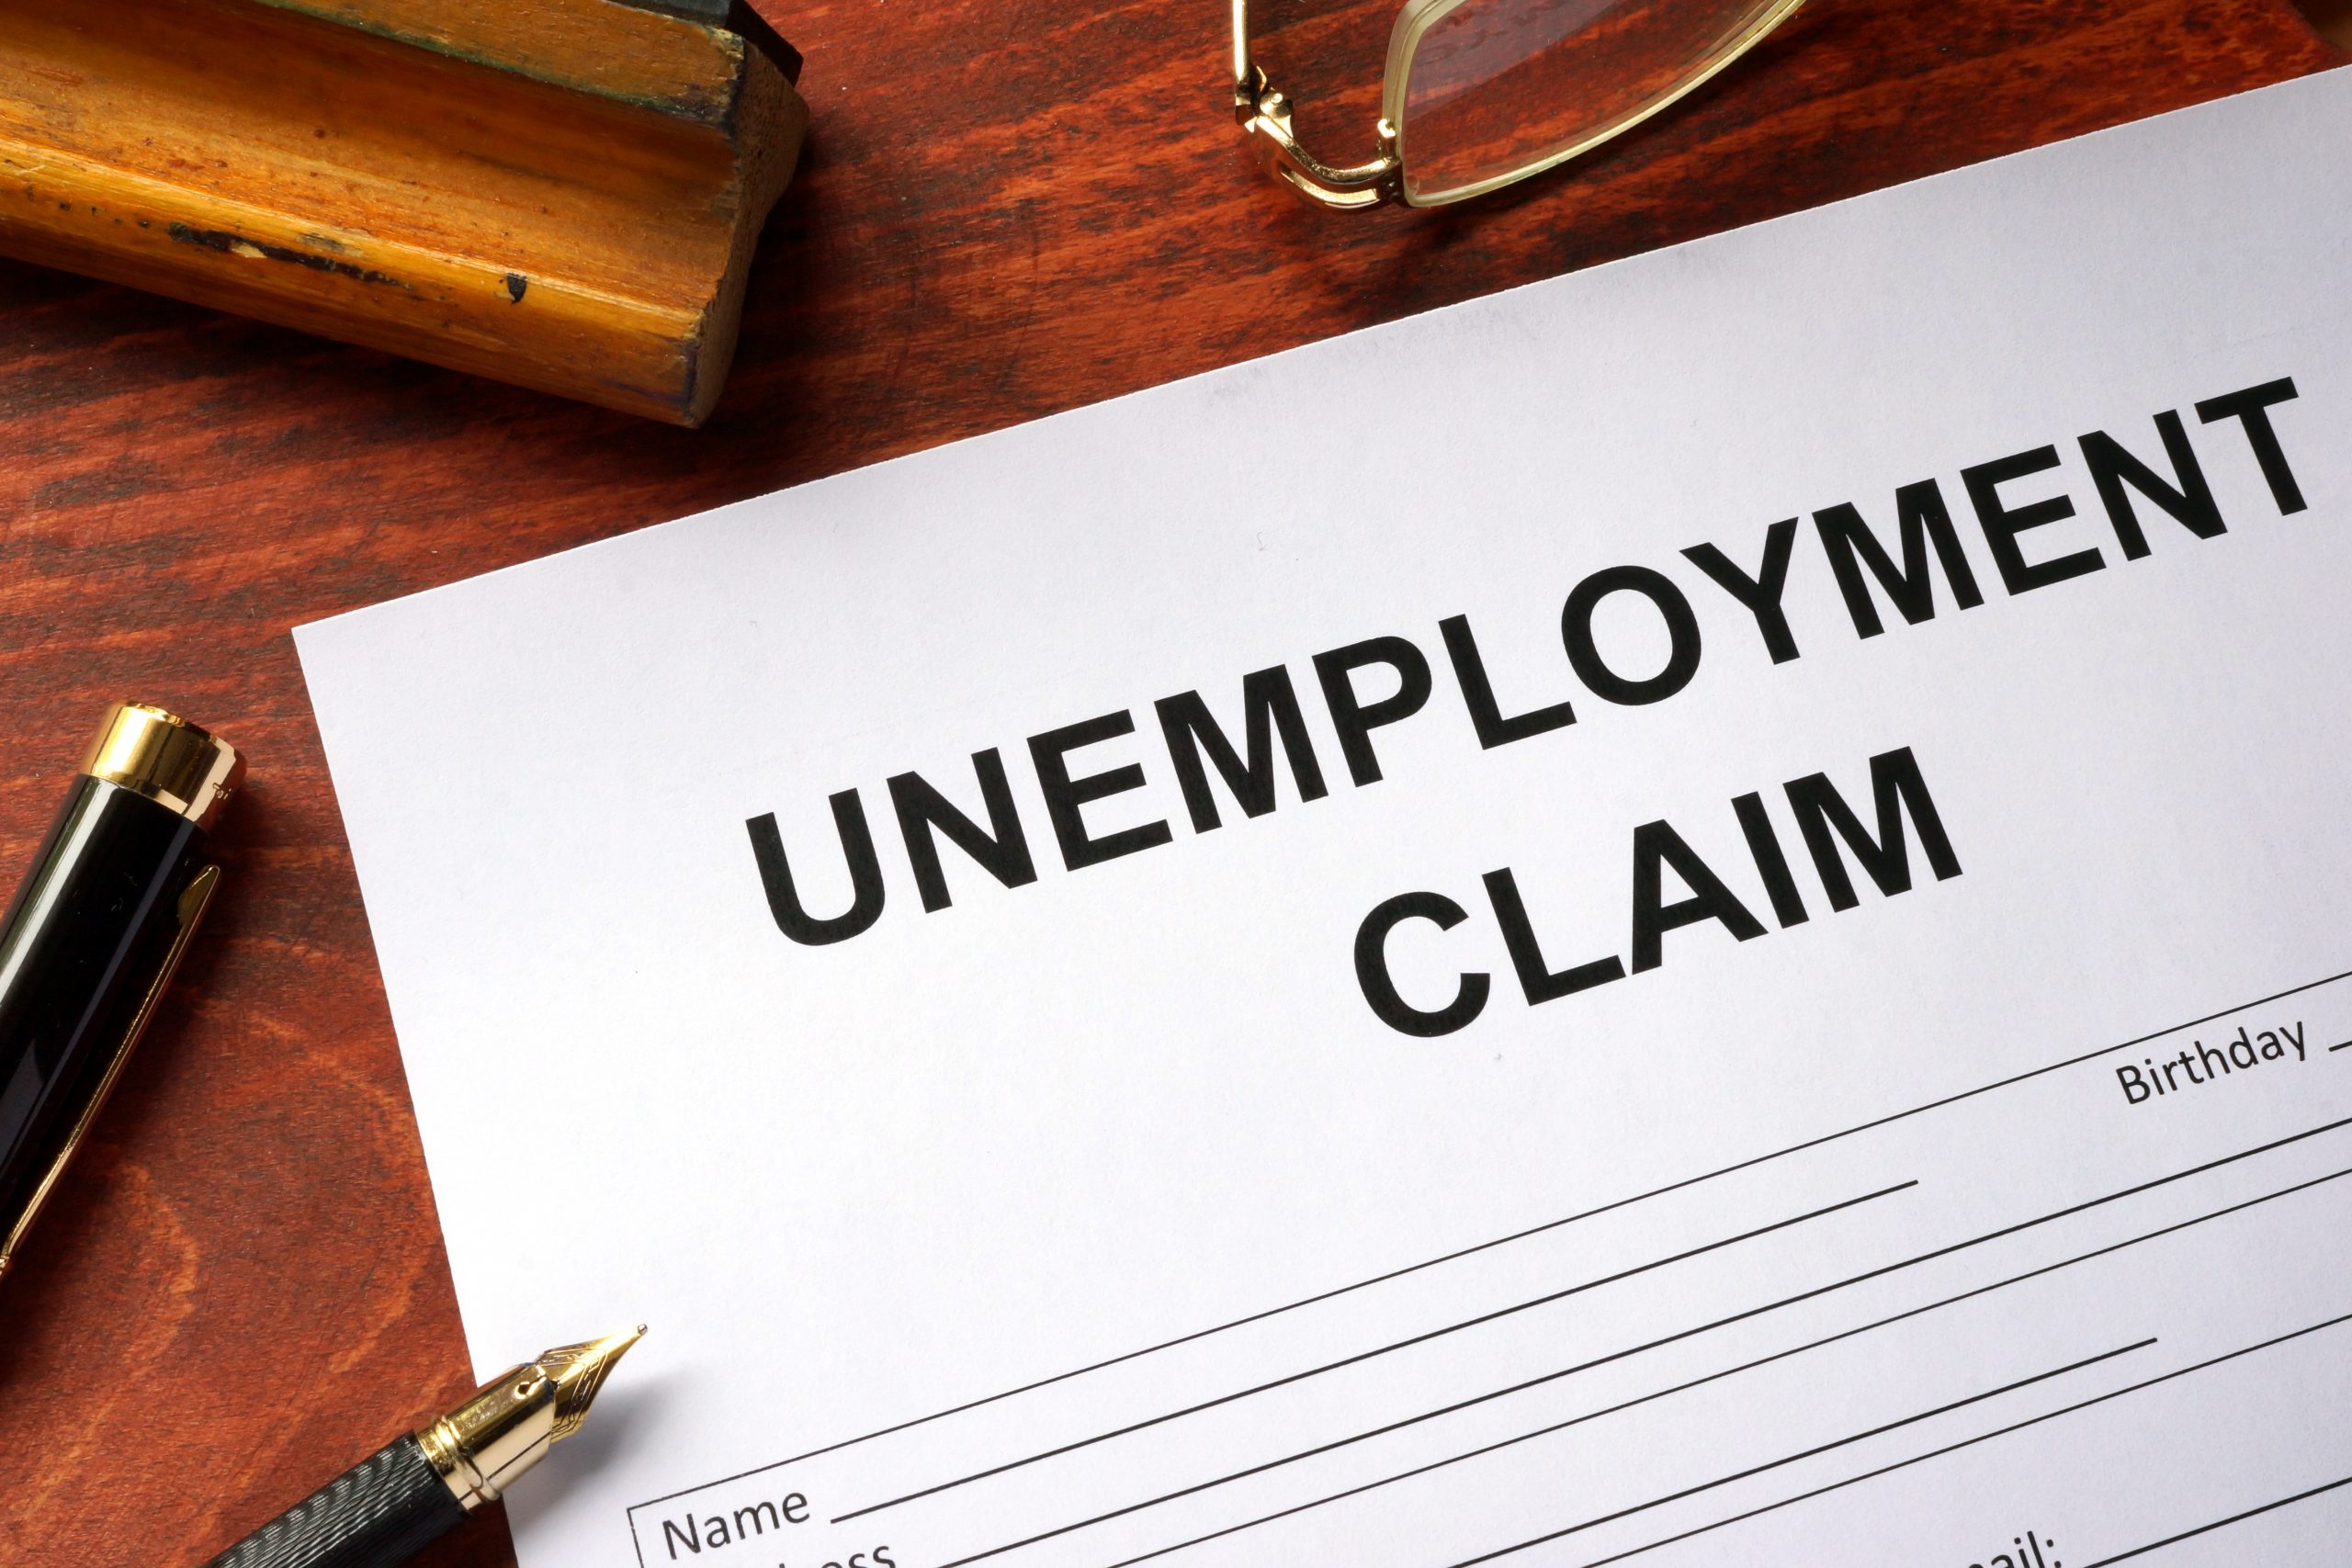 Unemployment claim form on an office table